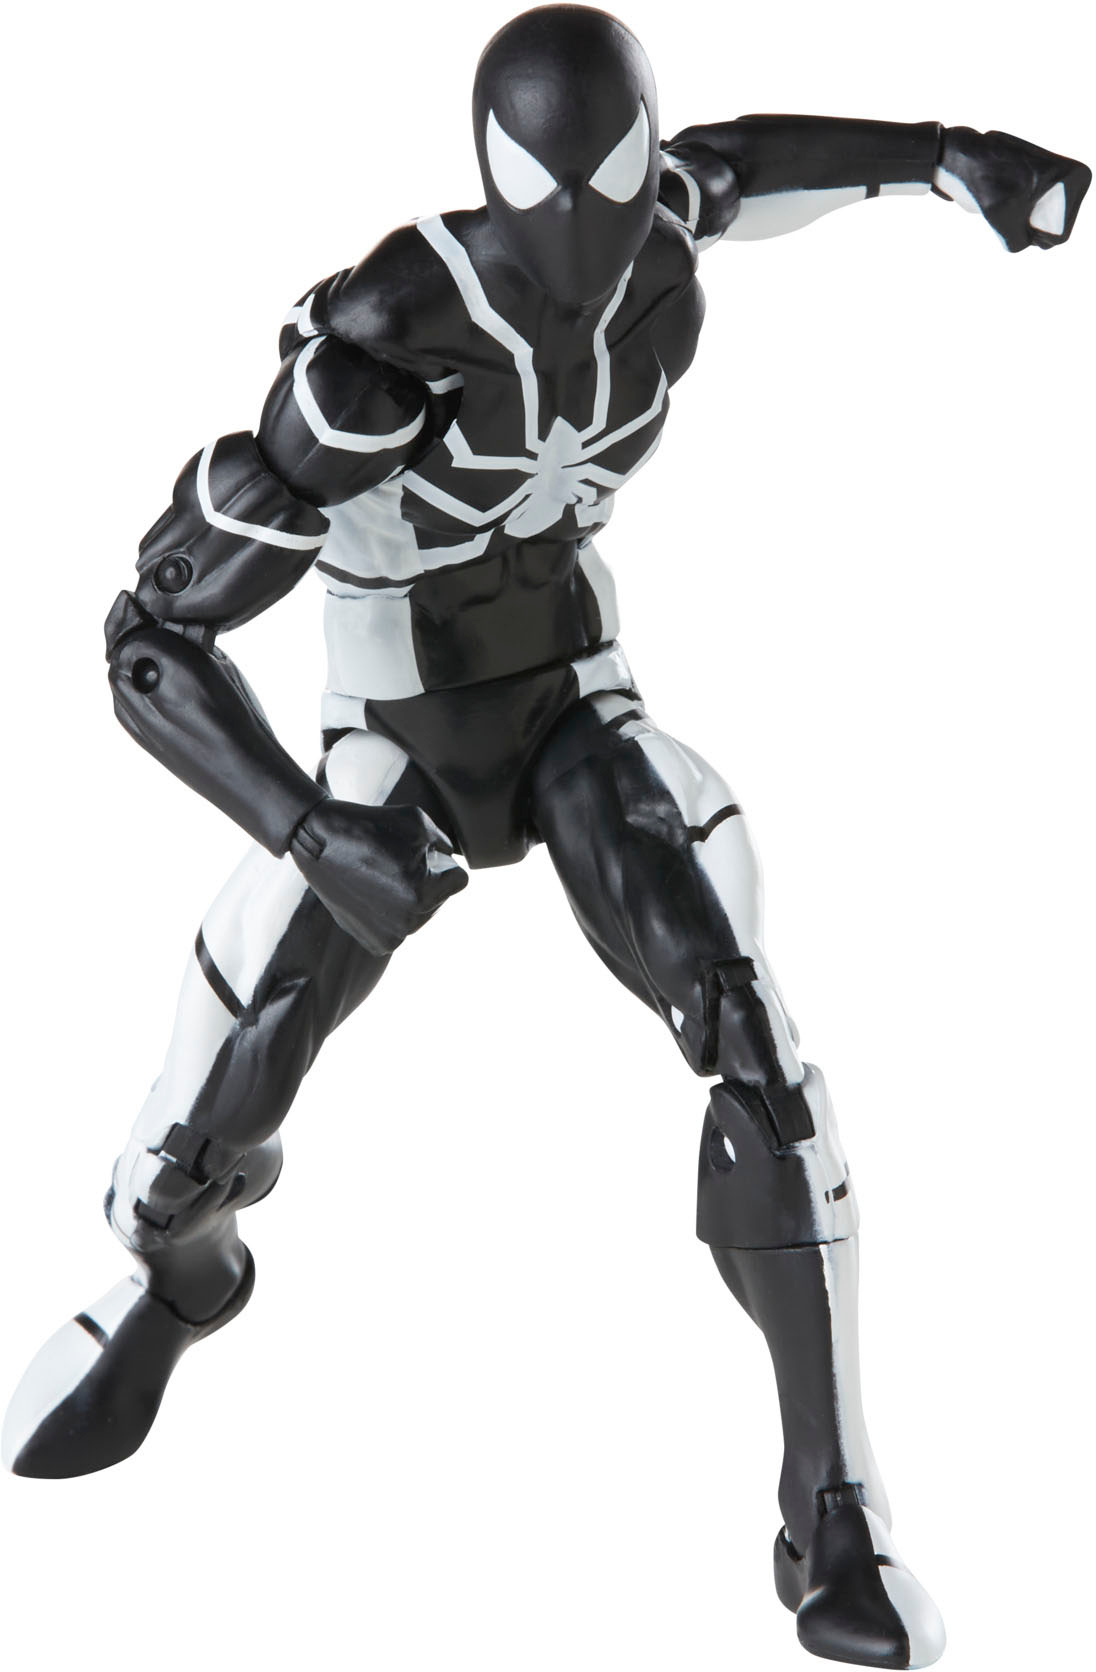 Marvel Legends Series Spider-Man 6-inch Future Foundation Spider-Man  (Stealth Suit) Action Figure Toy, Includes 4 Accessories - Marvel